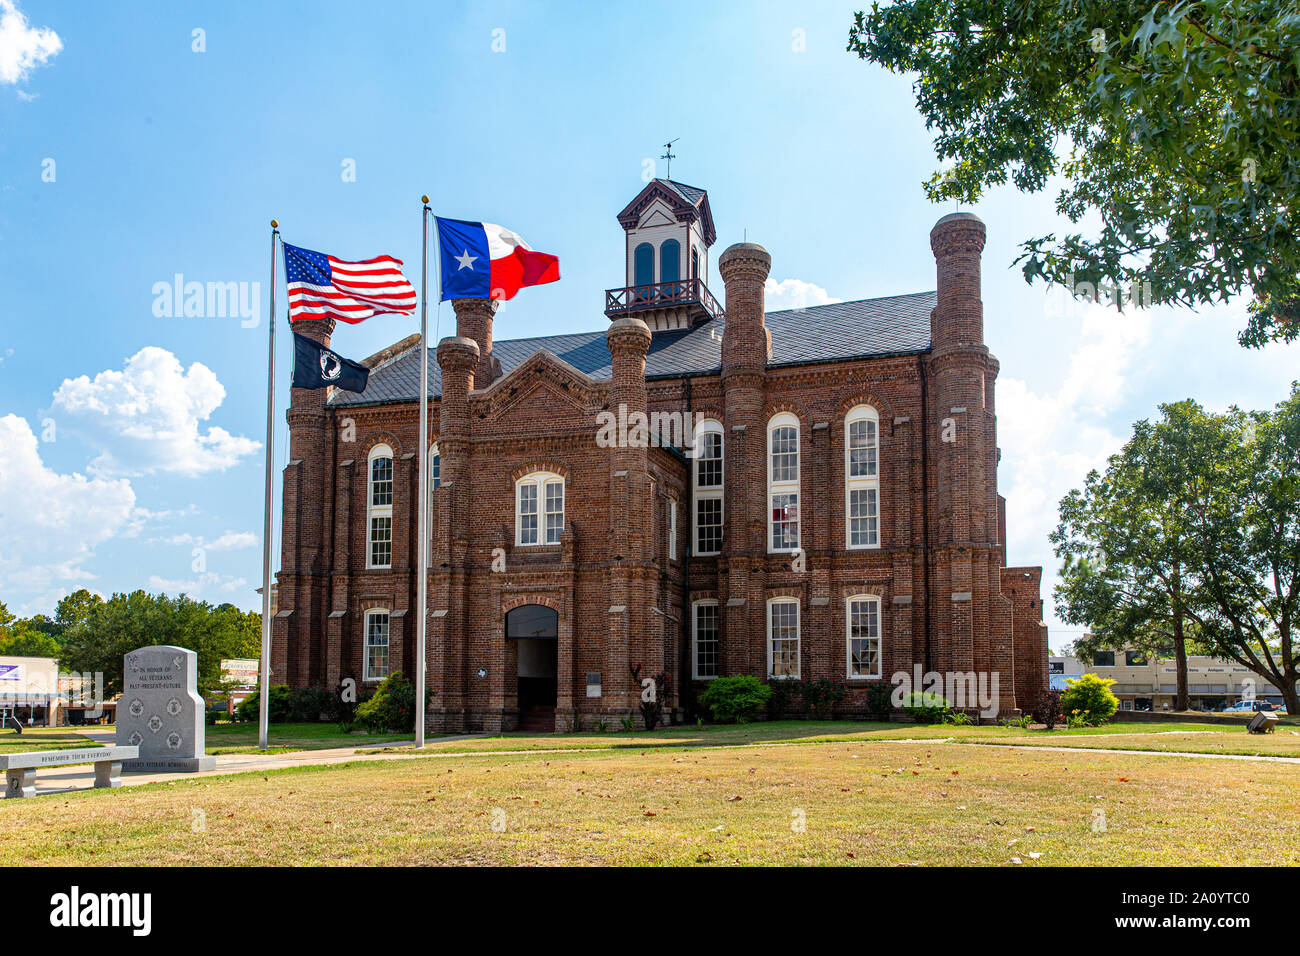 The historic 1885 Shelby county courthouse in Center, Texas which was rennovated in 1928. Stock Photo